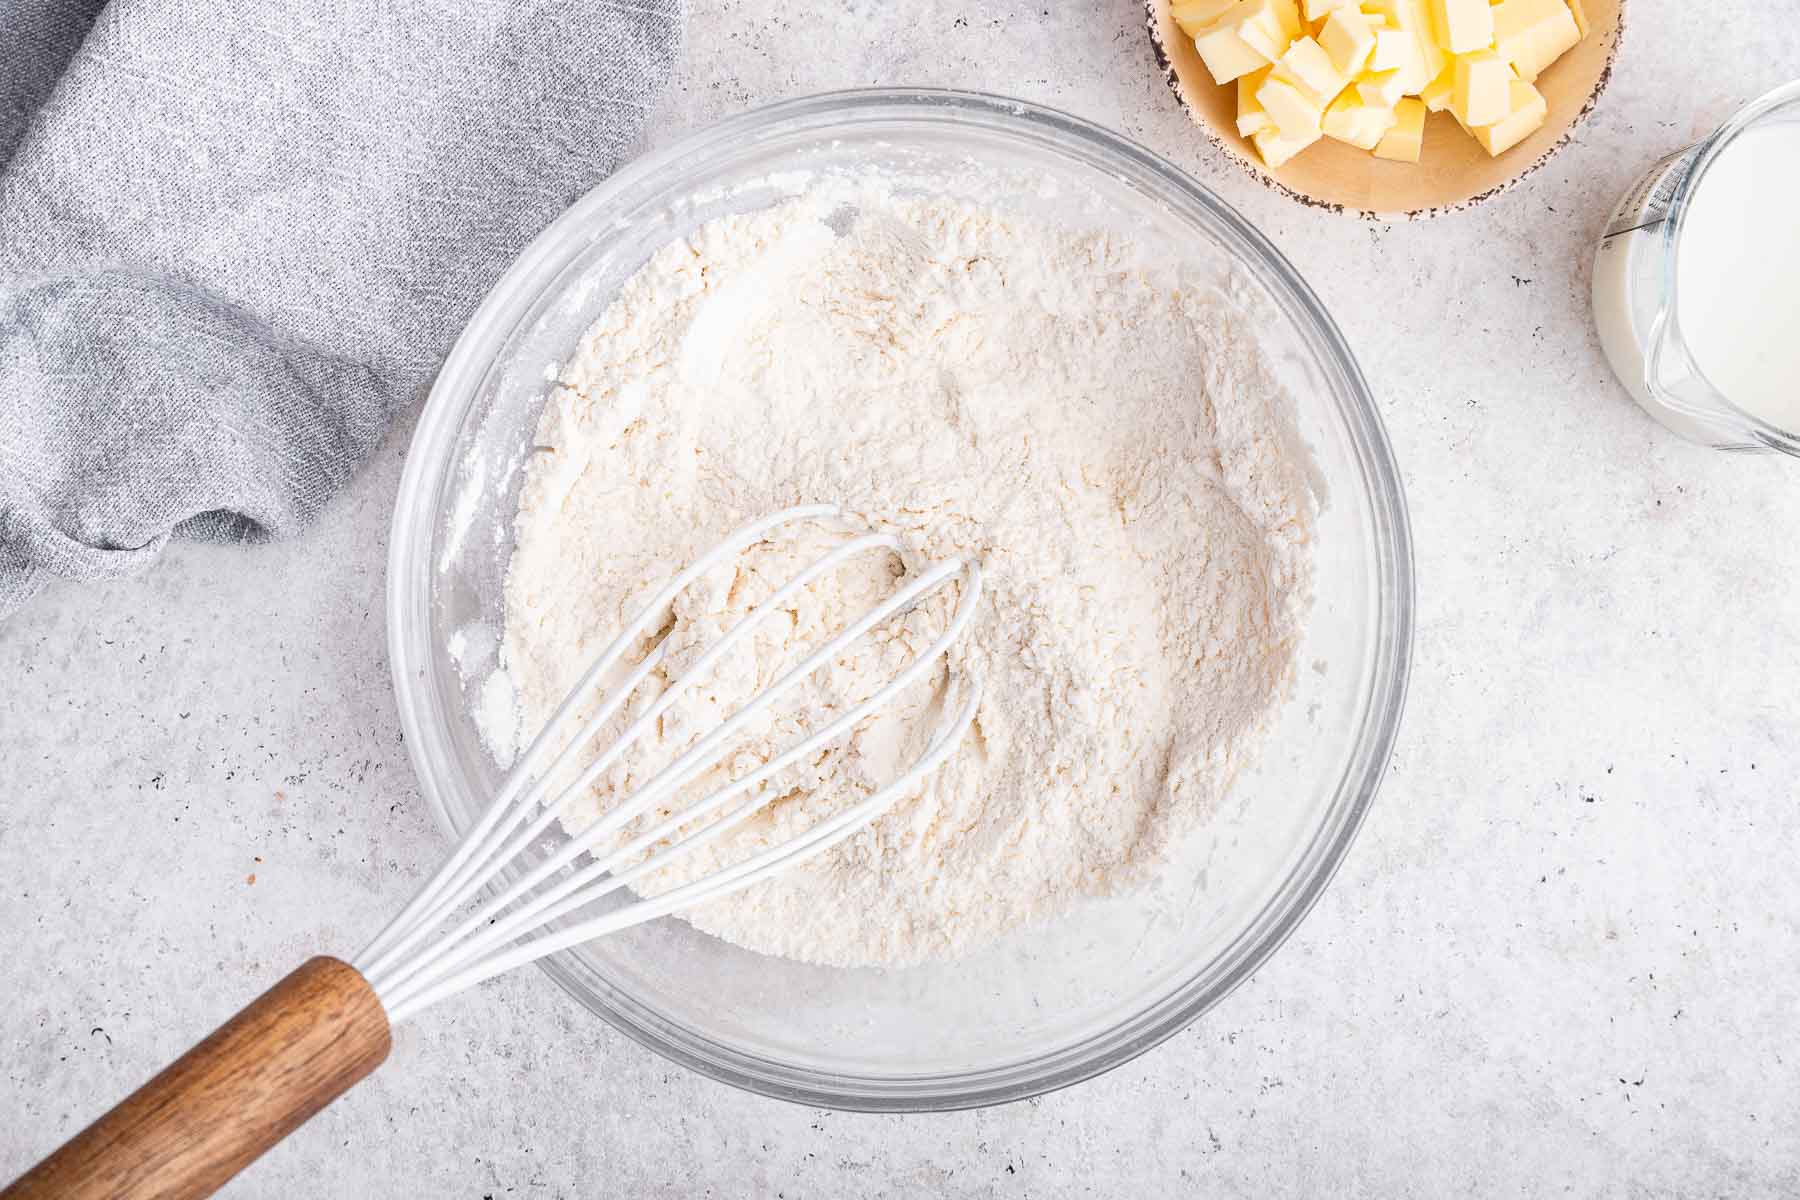 Whisk in bowl with flour and diced butter on the side.